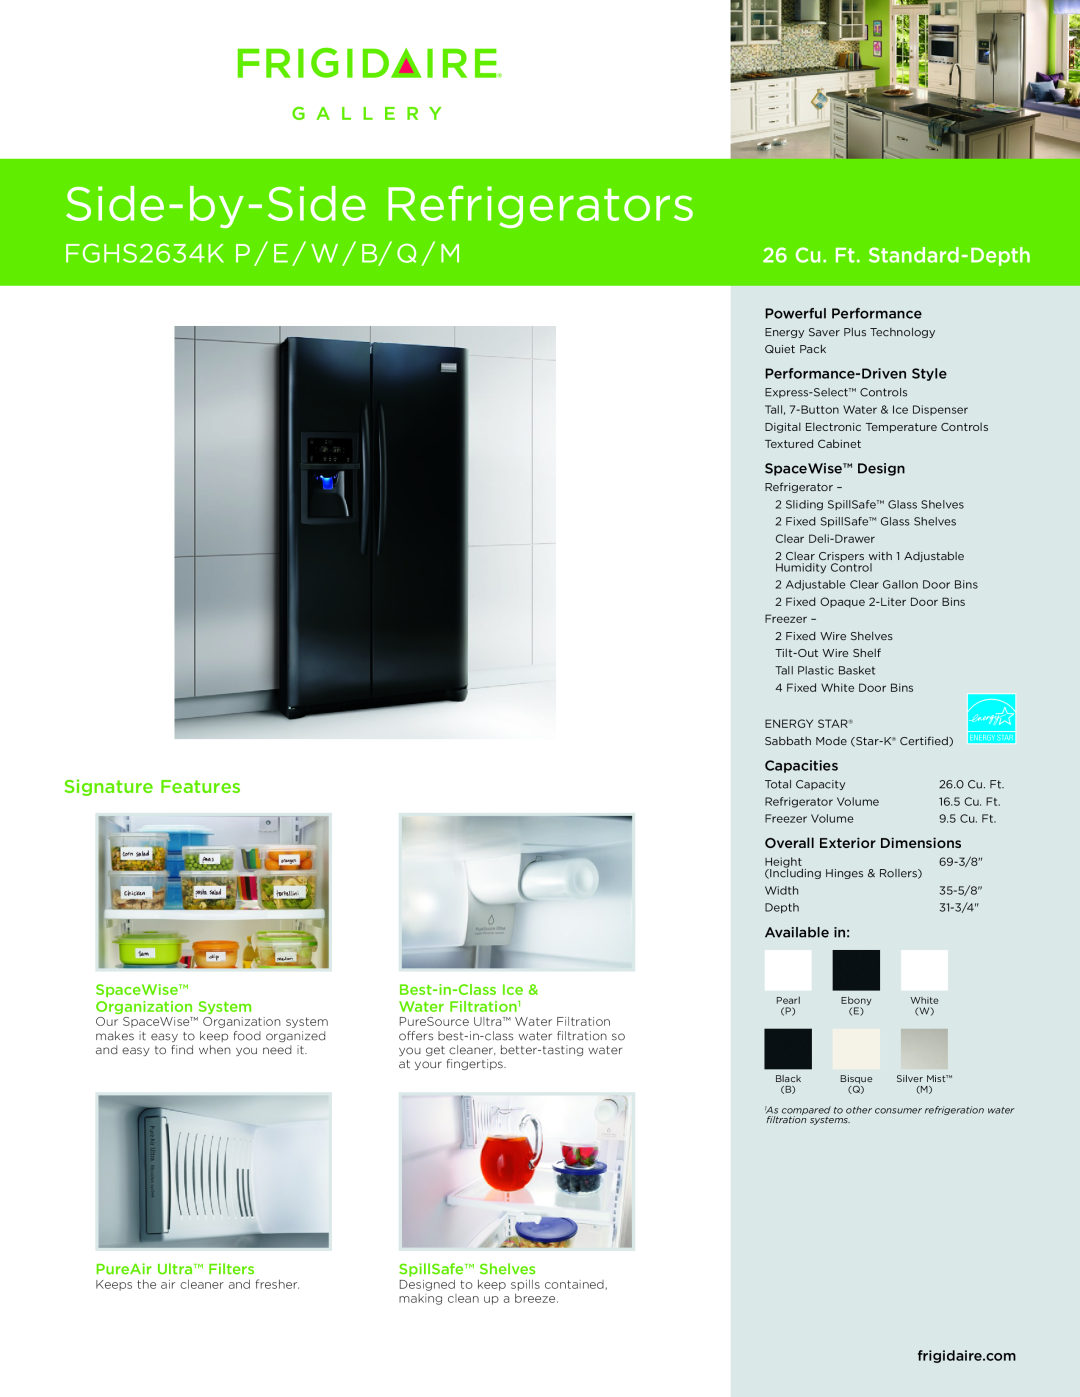 Frigidaire FGHS2634KE dimensions SpaceWise, Best-in-ClassIce, Organization System, Water Filtration1, SpillSafe Shelves 